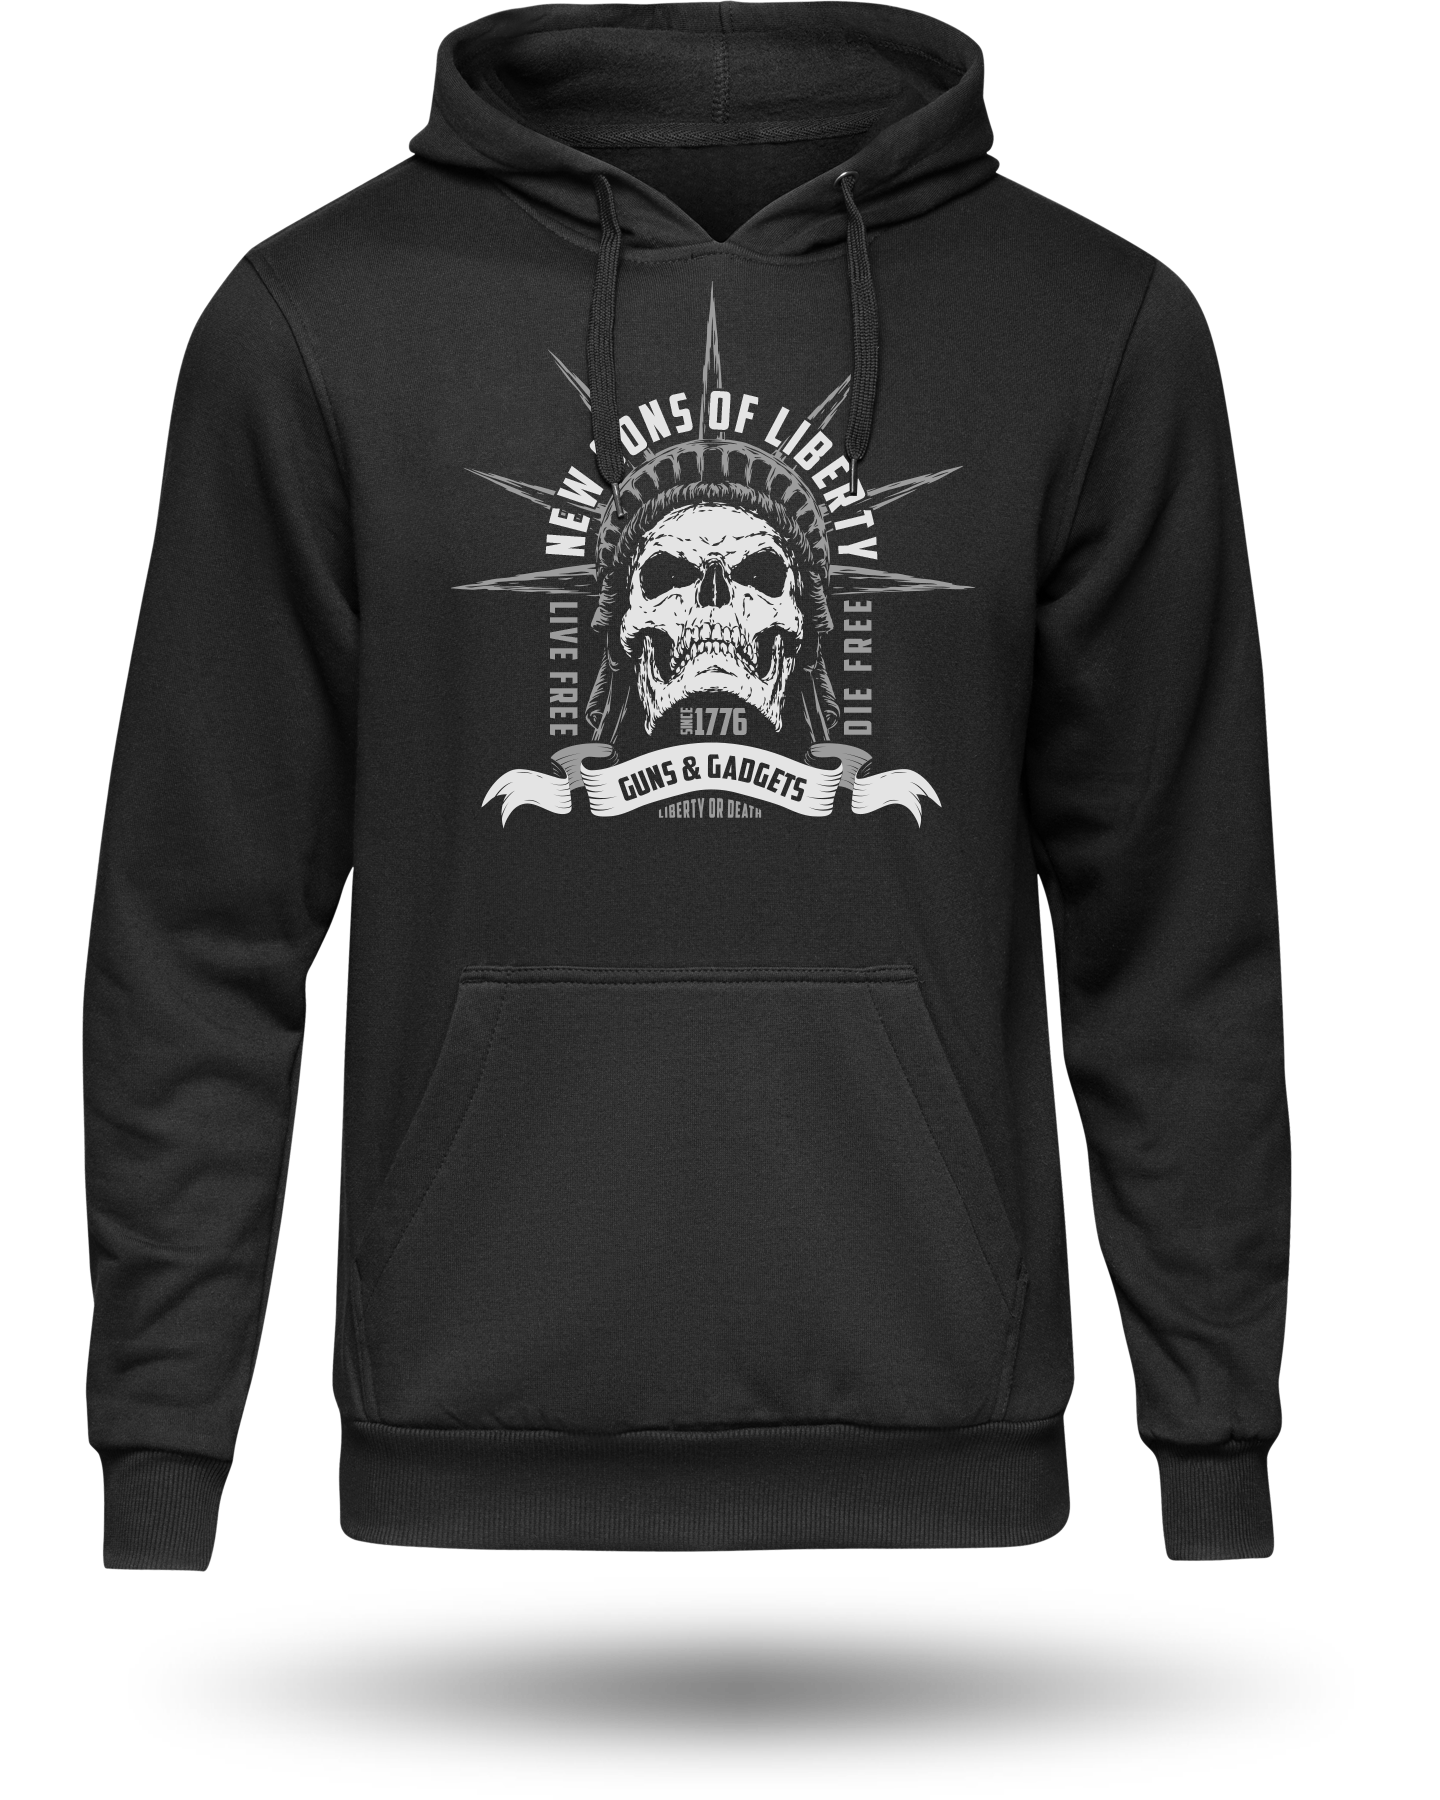 HOODIES - TriStar Trading Co.